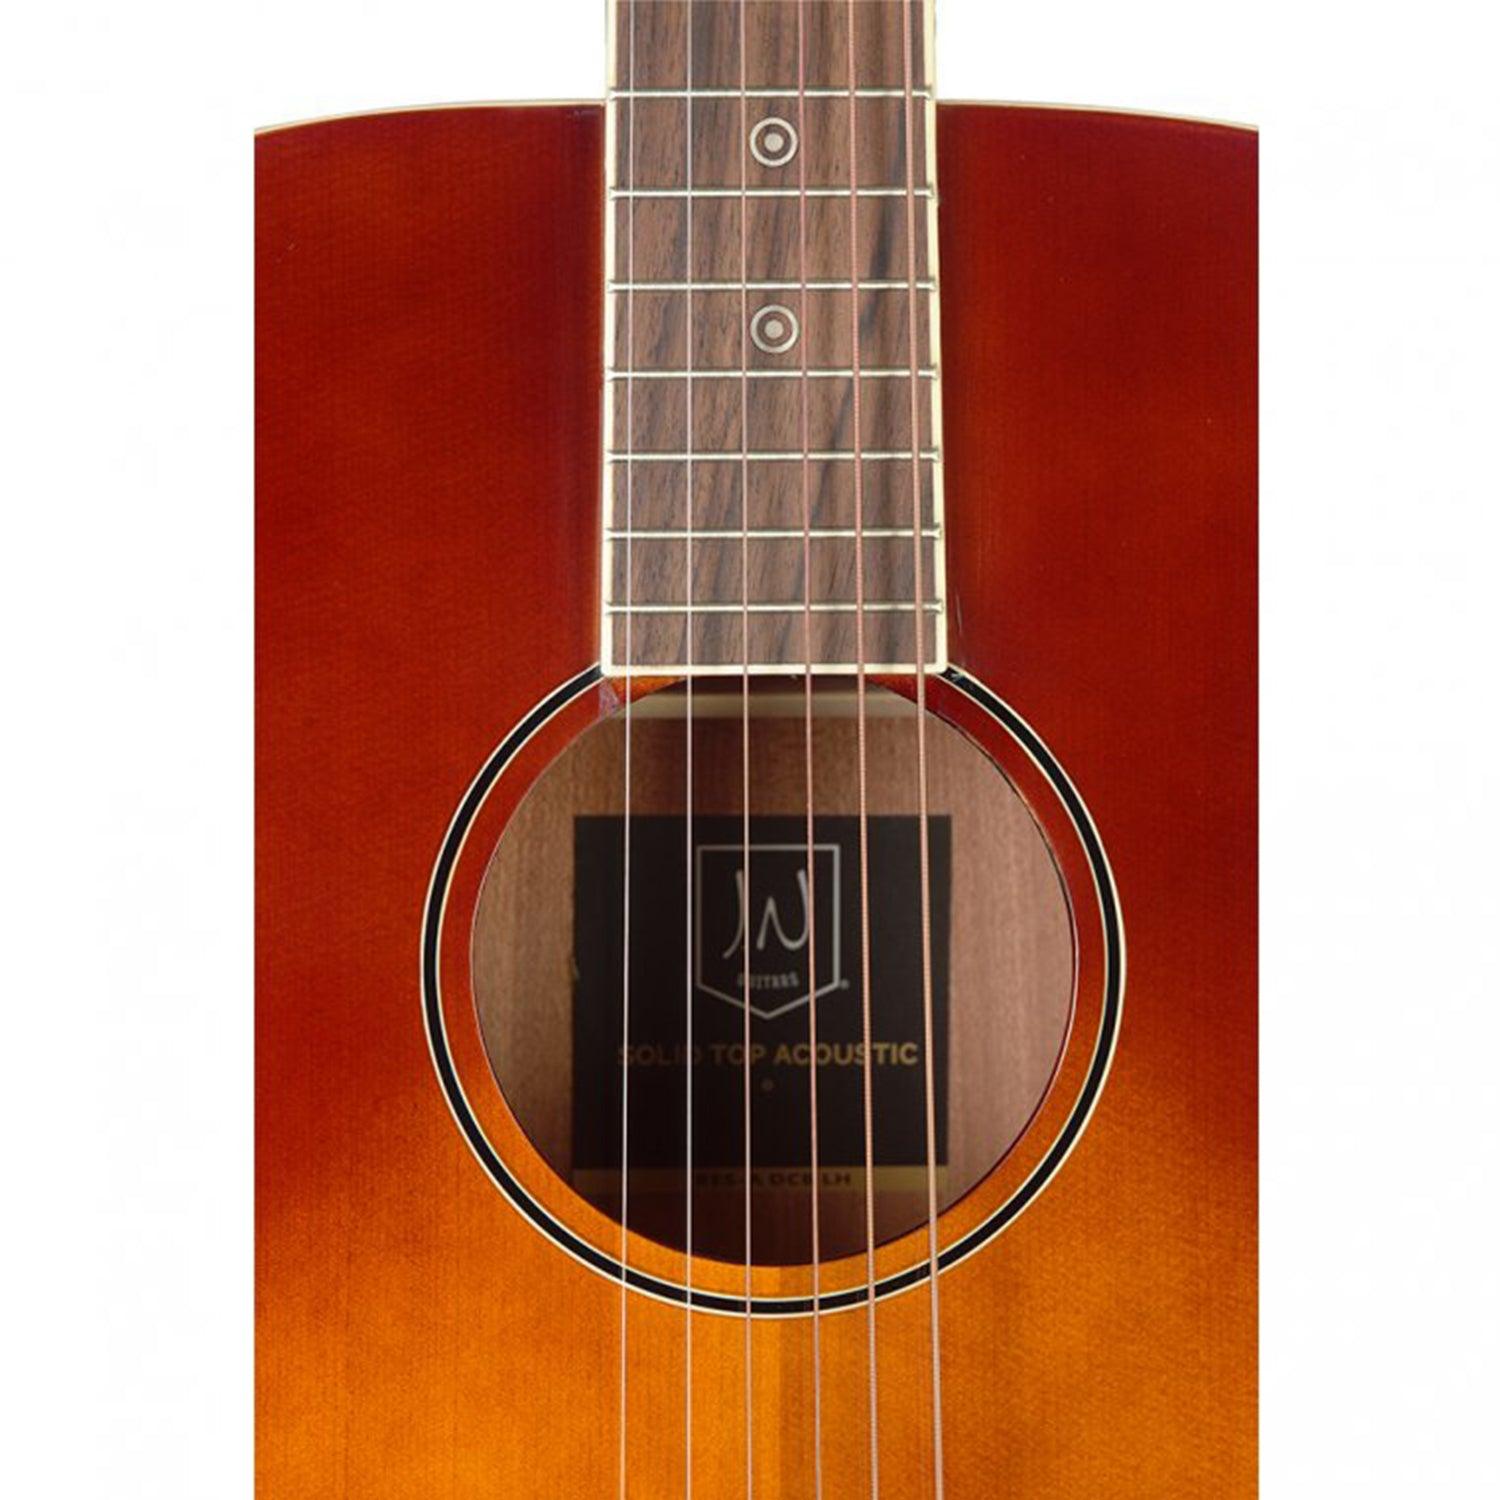 J.N Guitars BES-A DCB LH Dark Cherryburst Acoustic Auditorium Guitar with Solid Spruce Top, left-handed, Bessie series - DY Pro Audio